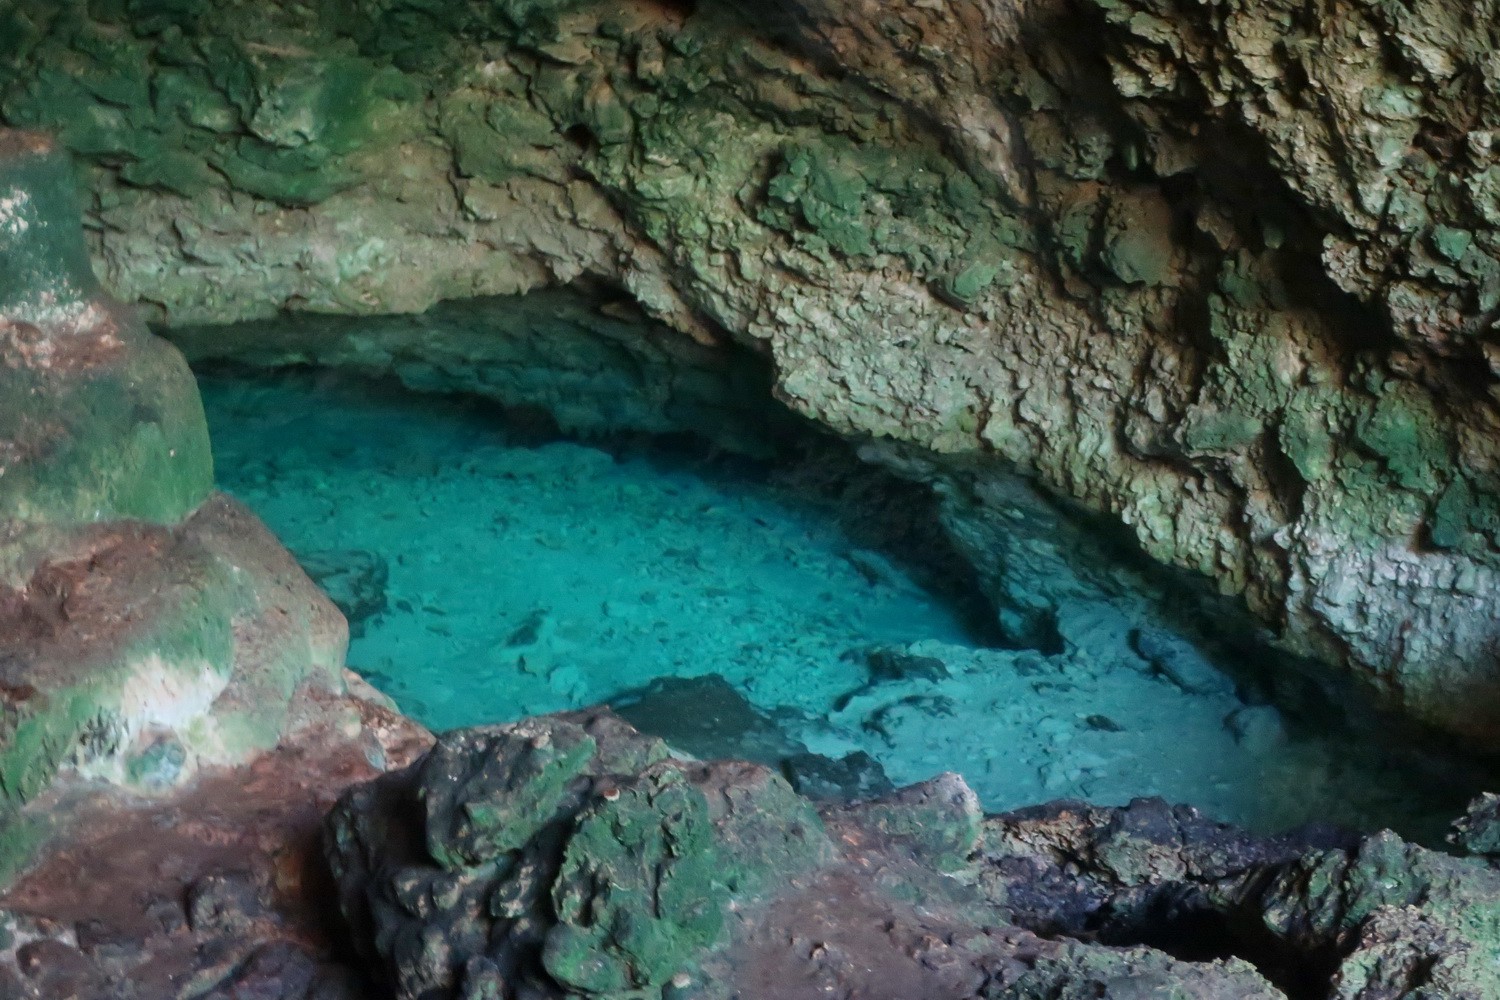 Fresh water in the cave - wonderful for swimming